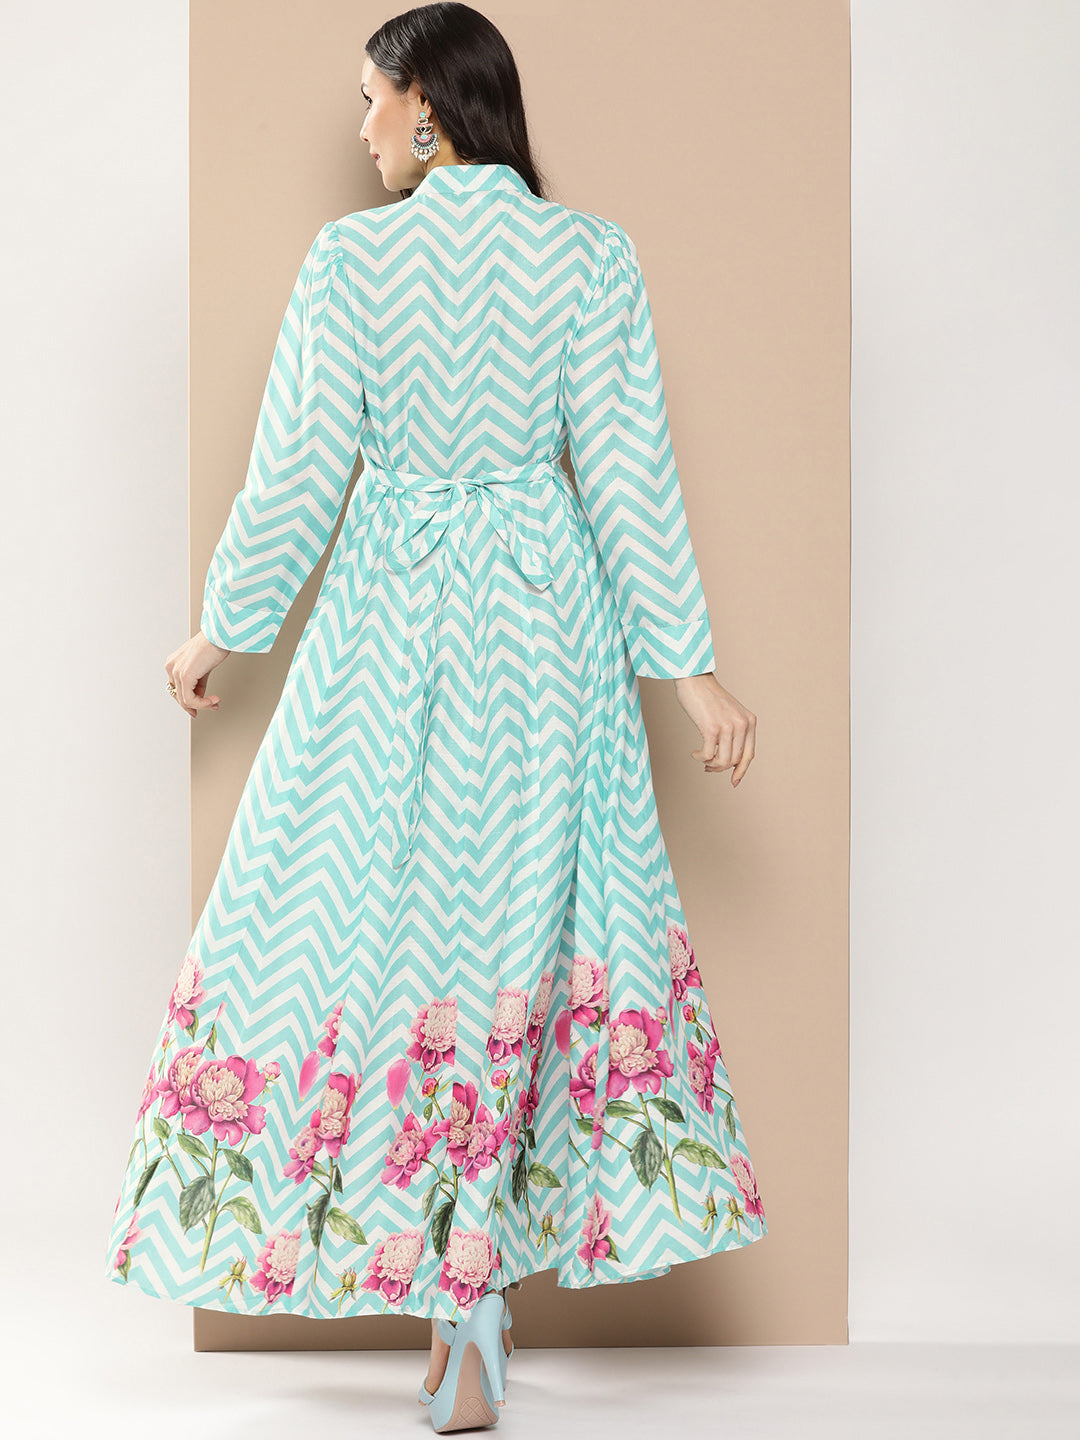 Women's Turquoise Blue Printed Long Dress With Tie-Up Neck - Bhama Couture